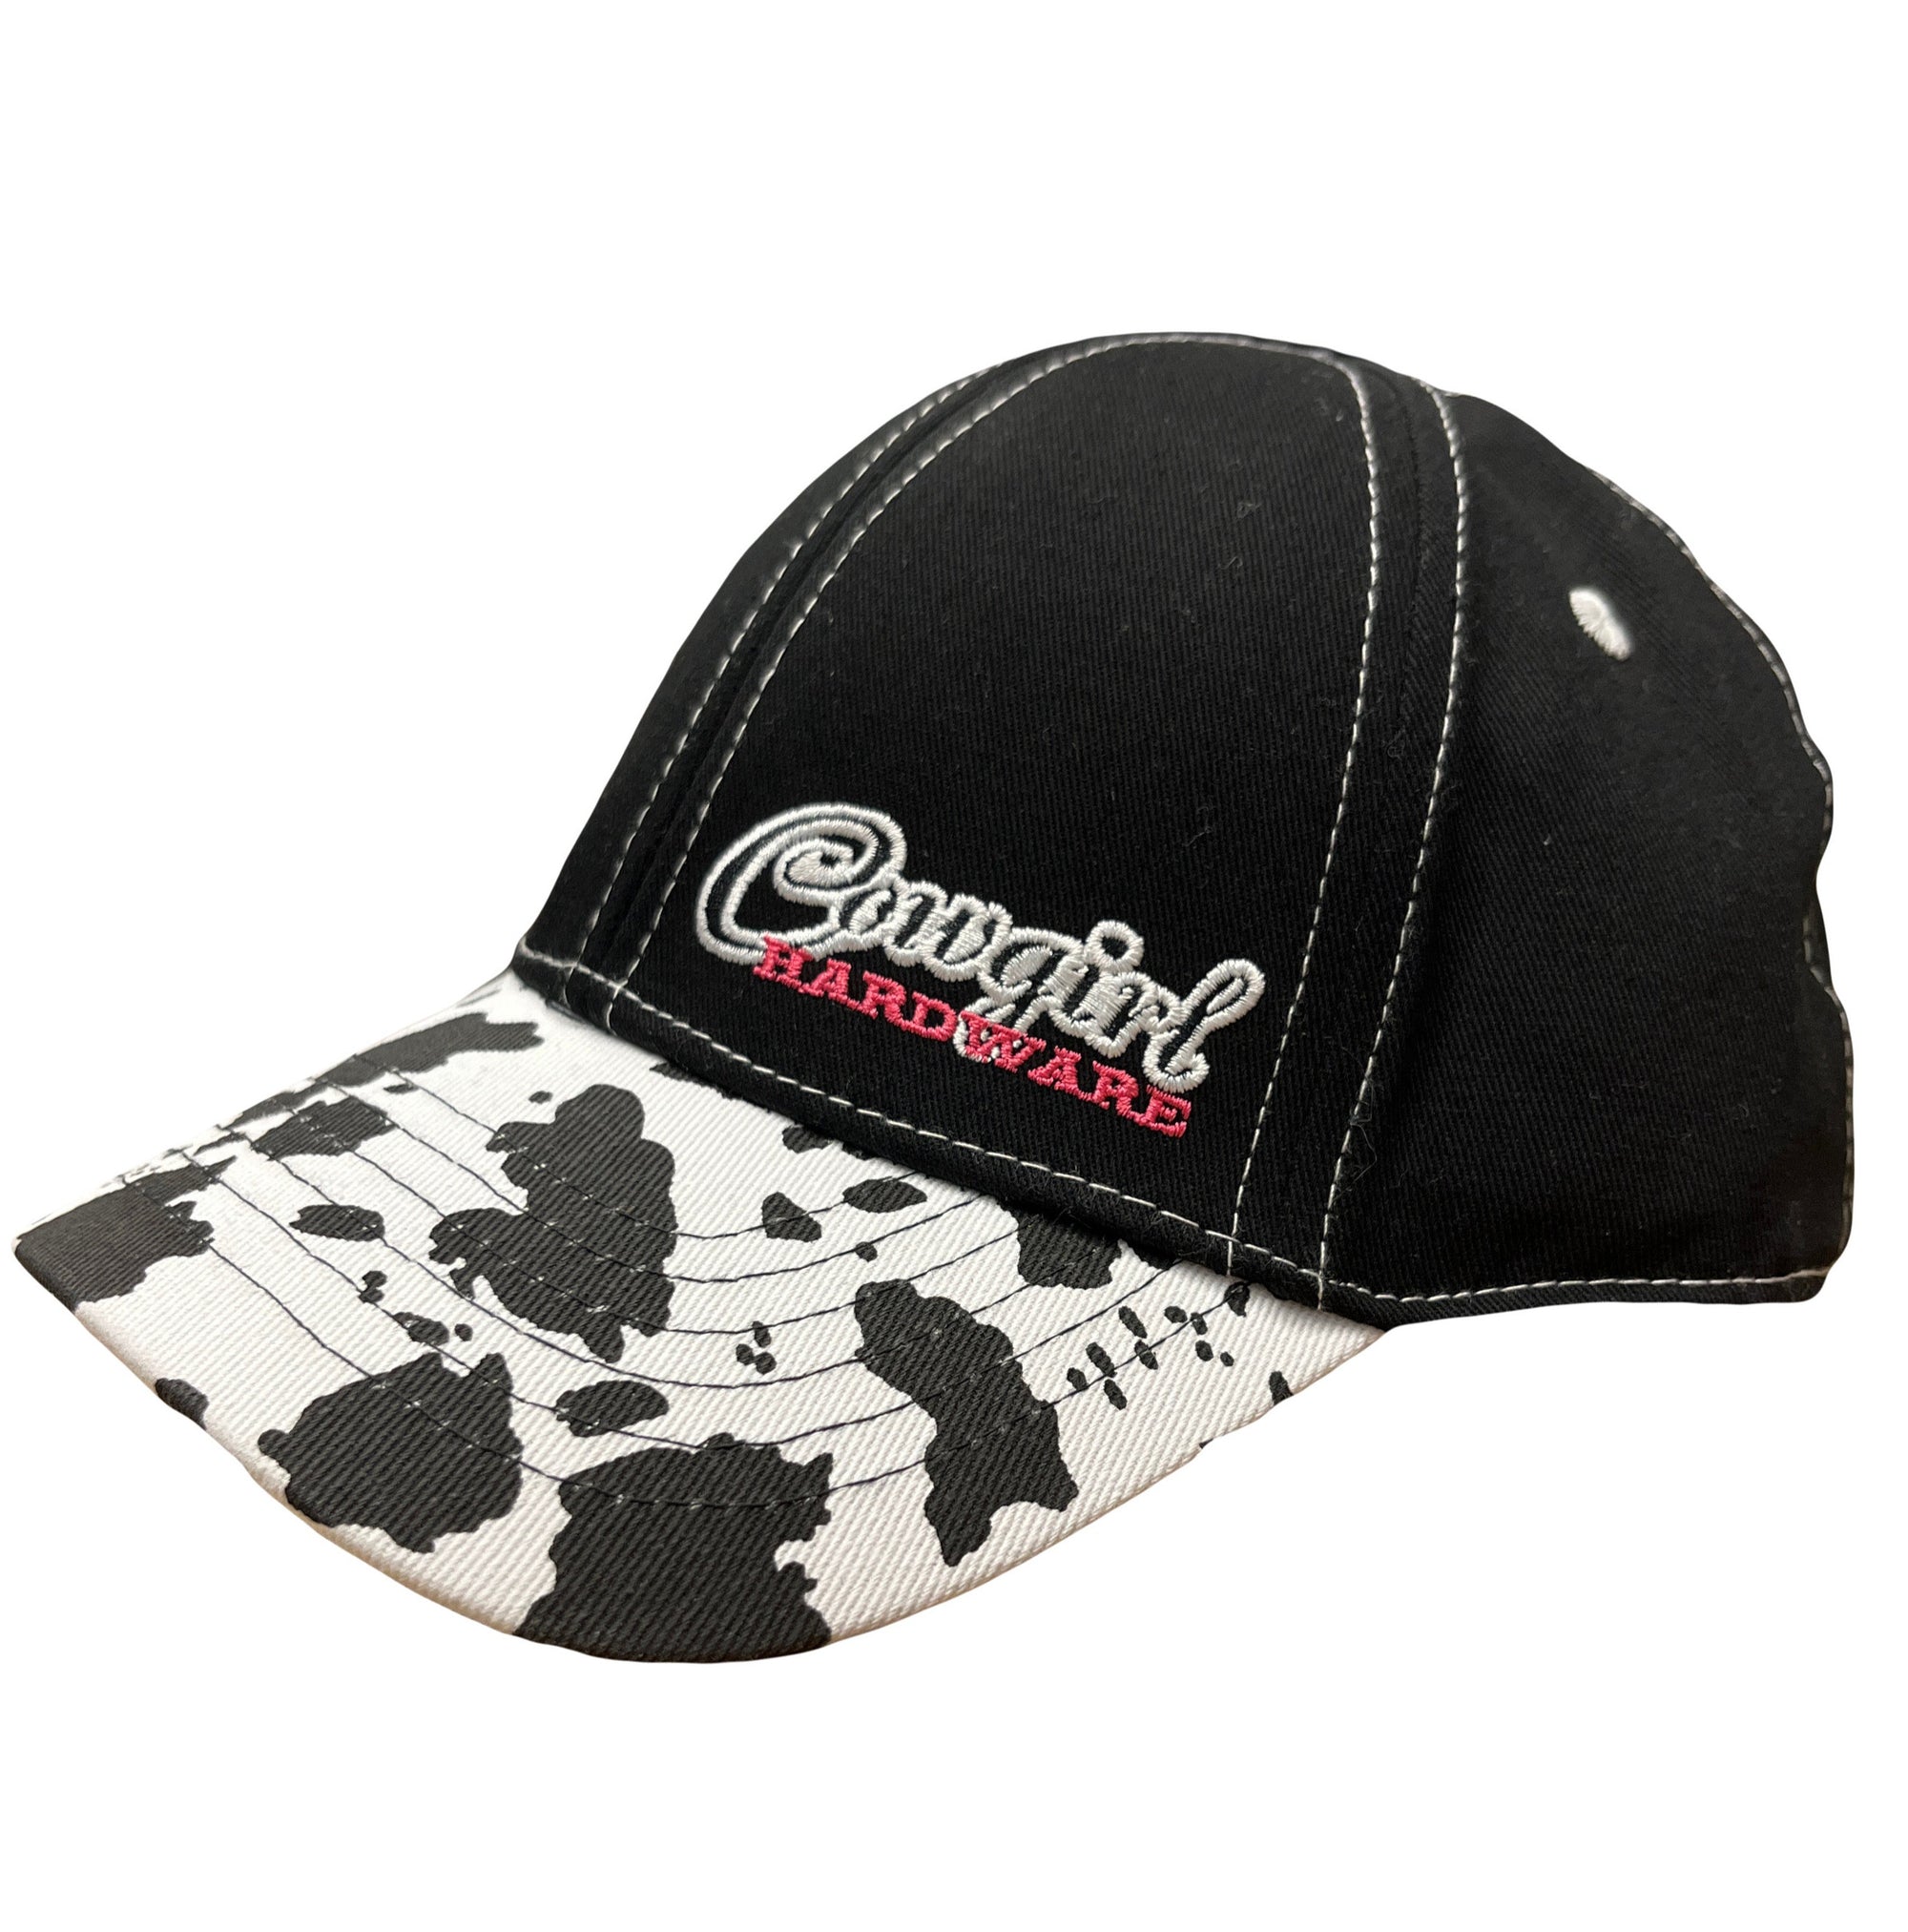 Cowgirl Hardware Girl's Cap STYLE 801608-010